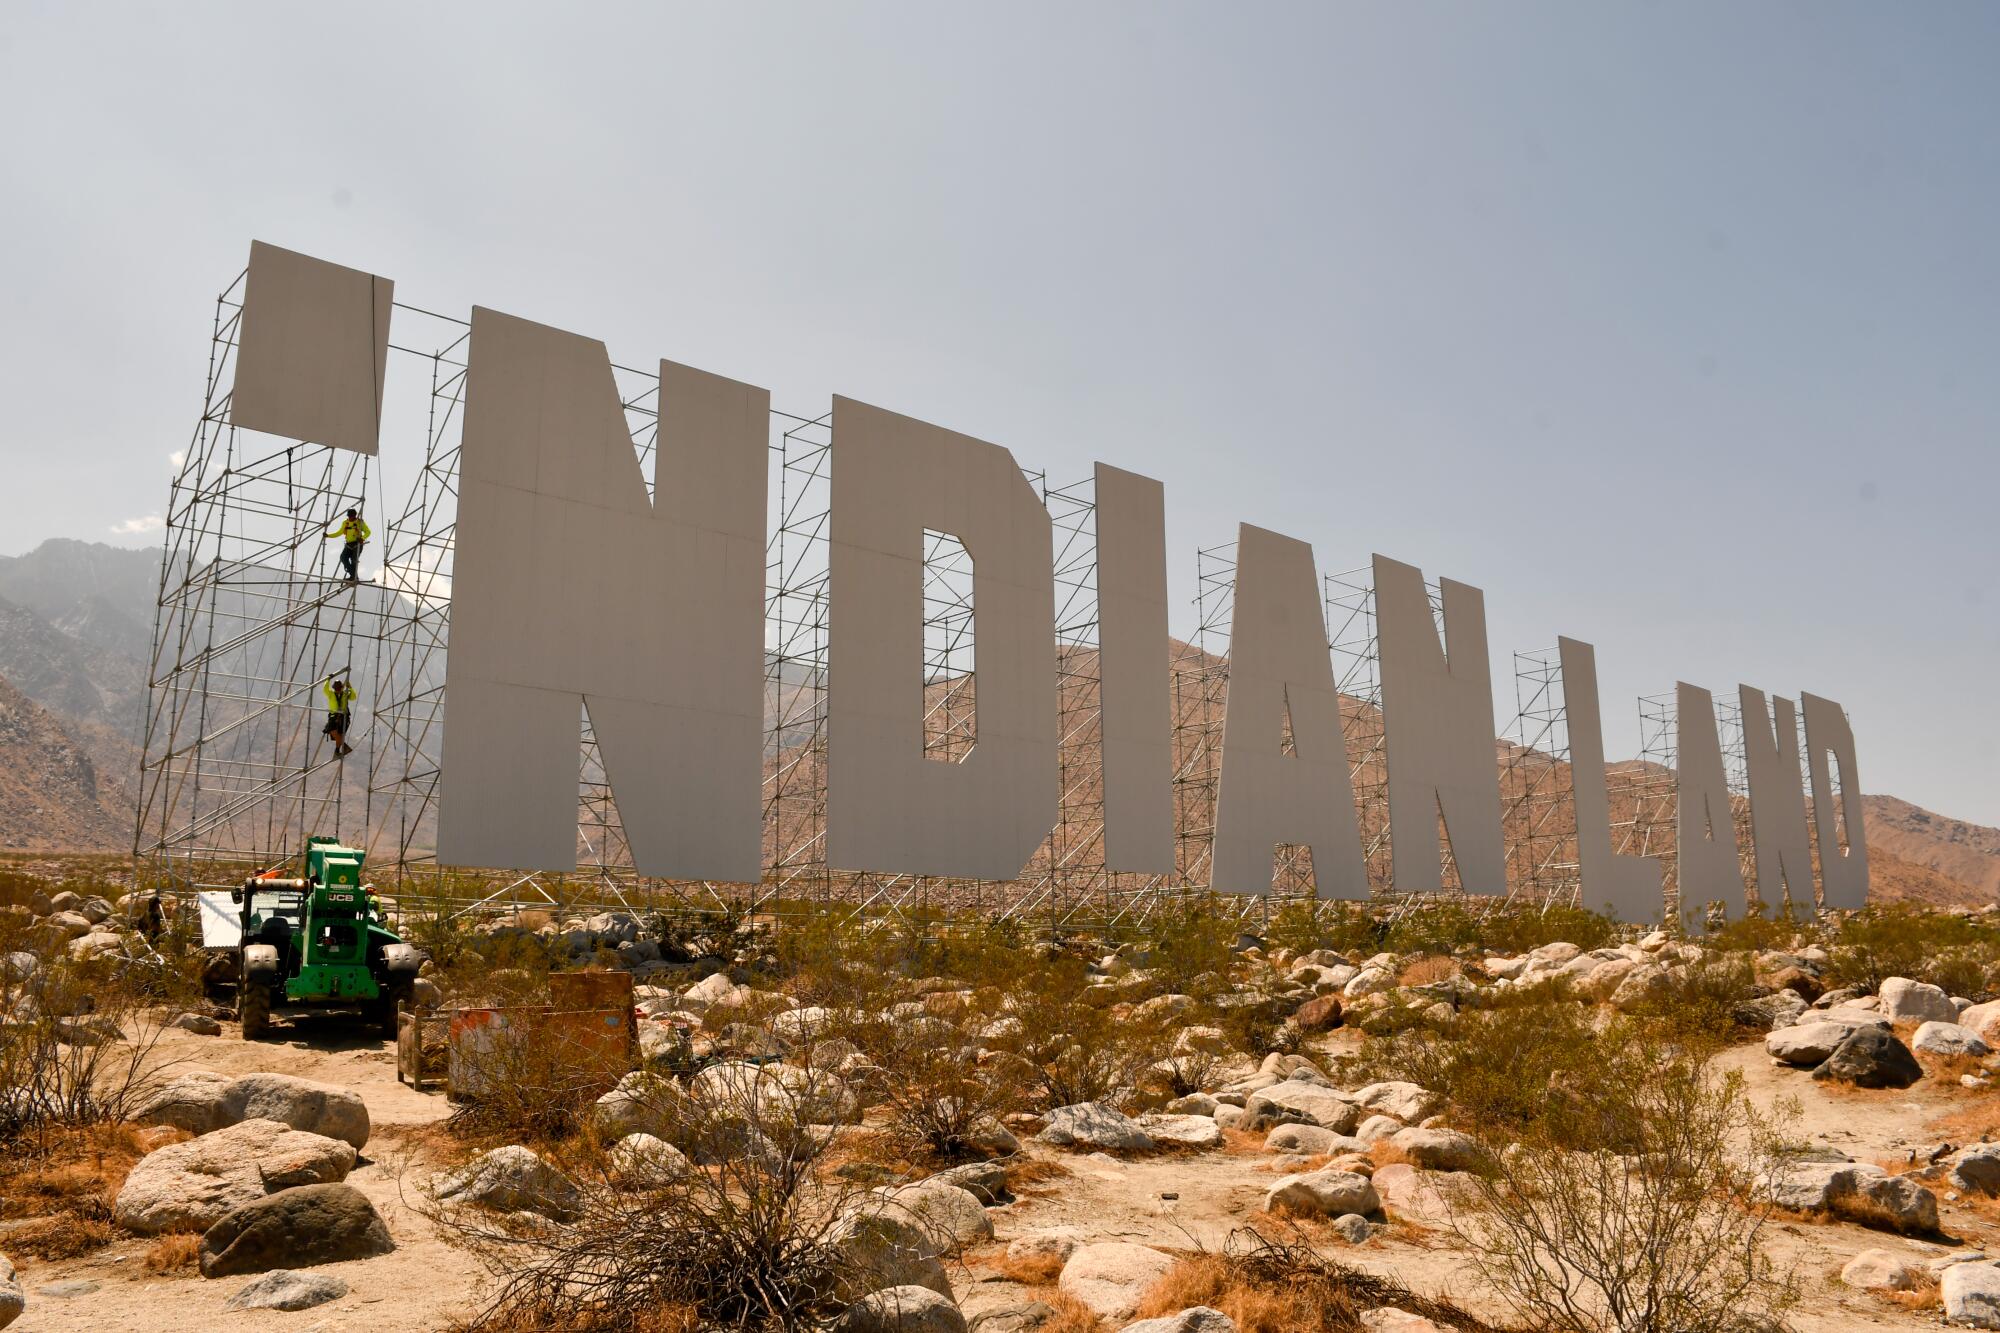 A giant sign reading "Indian Land" held up by scaffolding